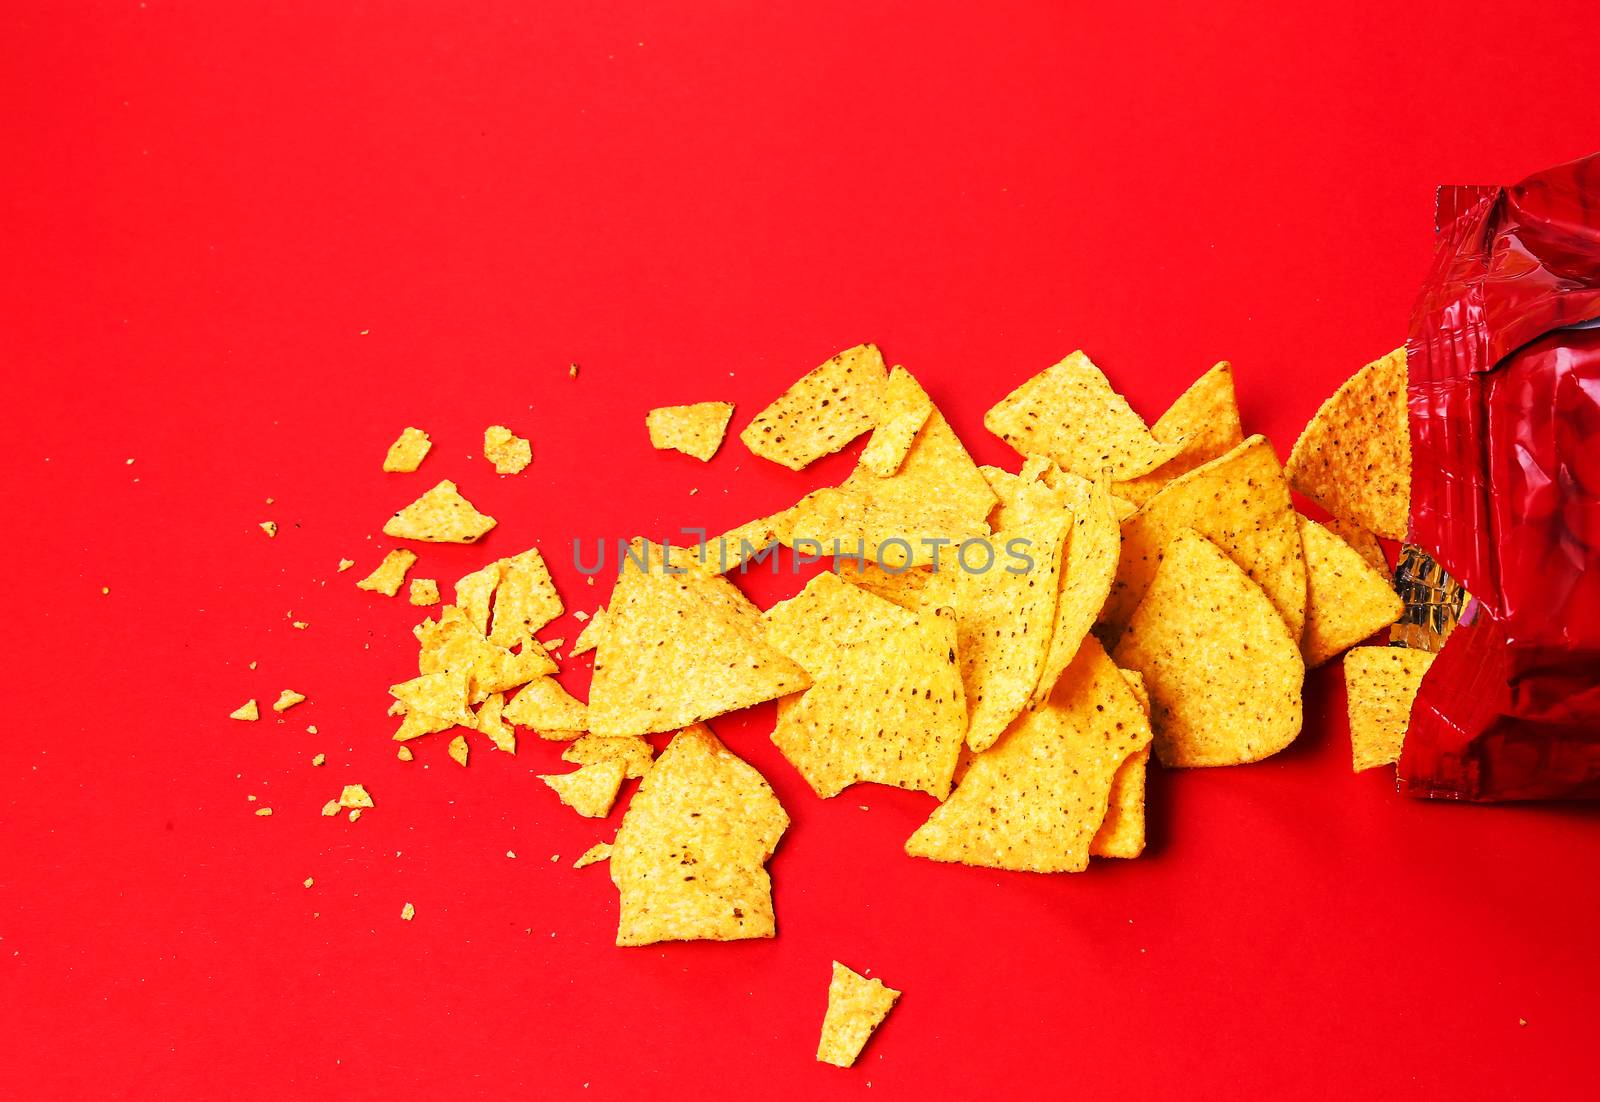 Potato chips on a red background